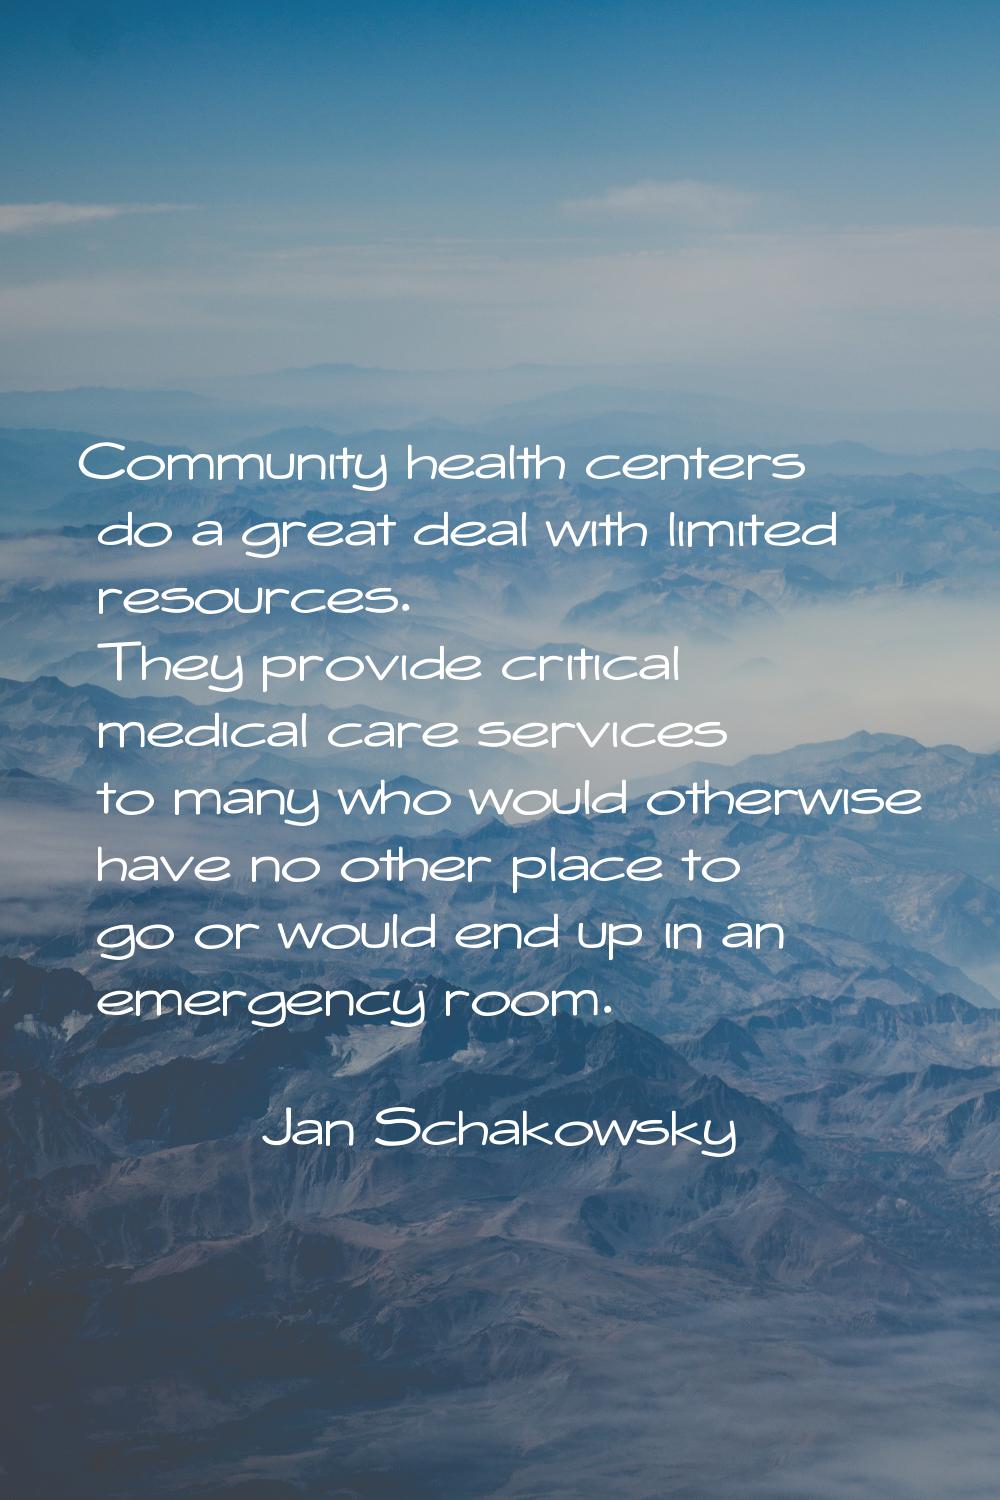 Community health centers do a great deal with limited resources. They provide critical medical care